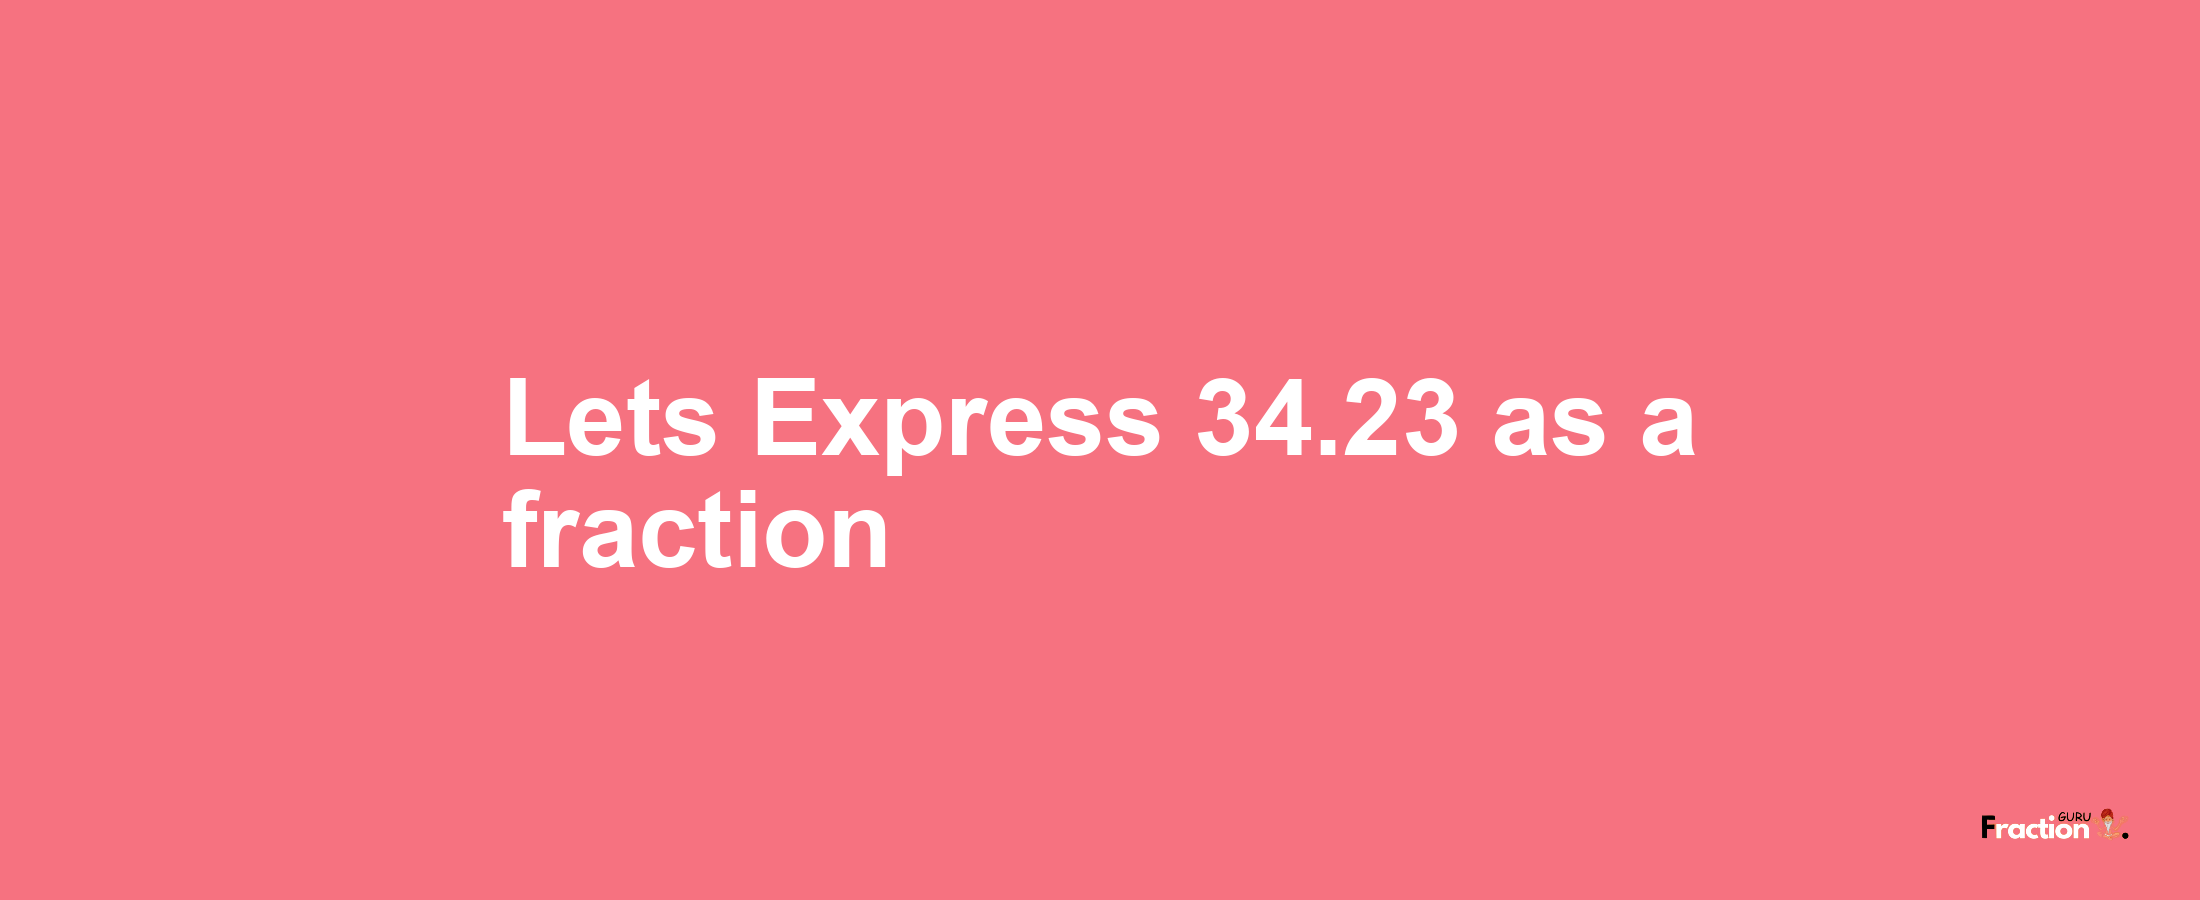 Lets Express 34.23 as afraction